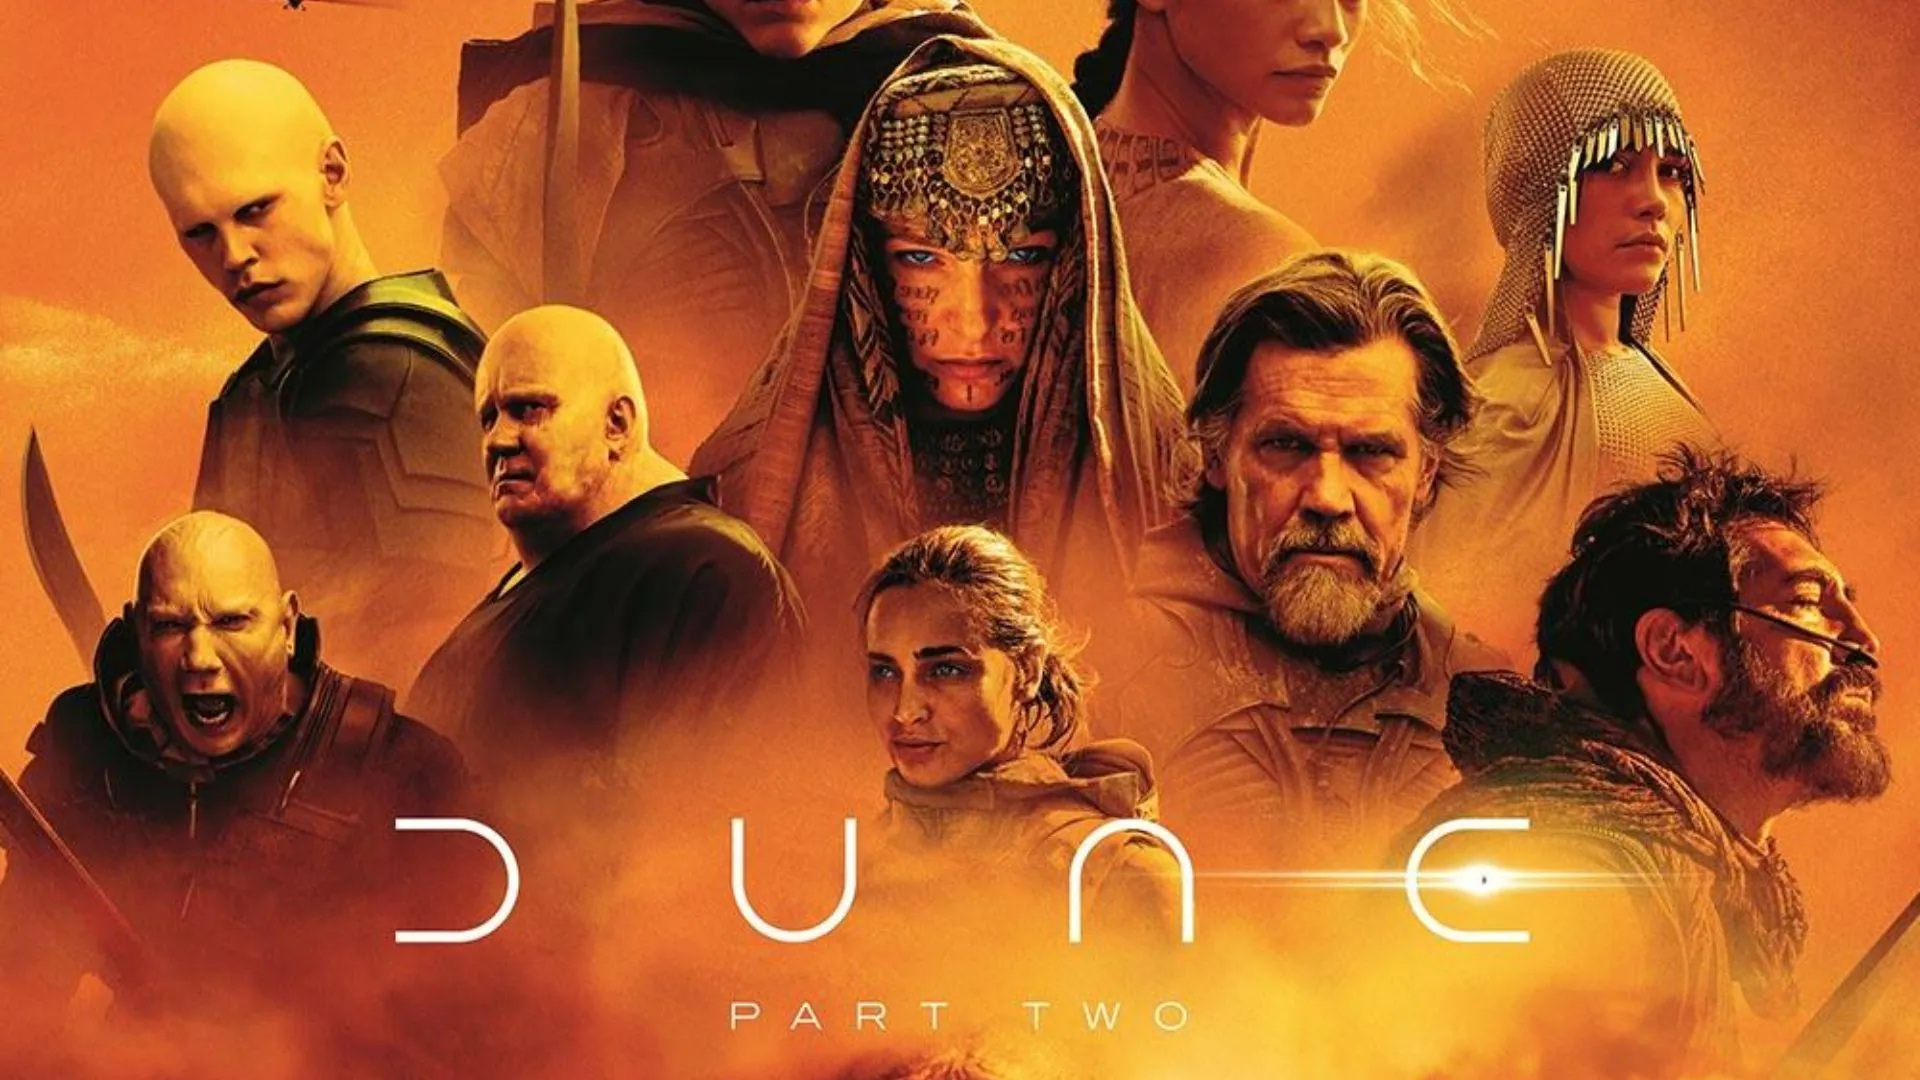 Dune Part Two Marks Resurgence of Epic Sci-Fi, Challenges Star Wars Dominance